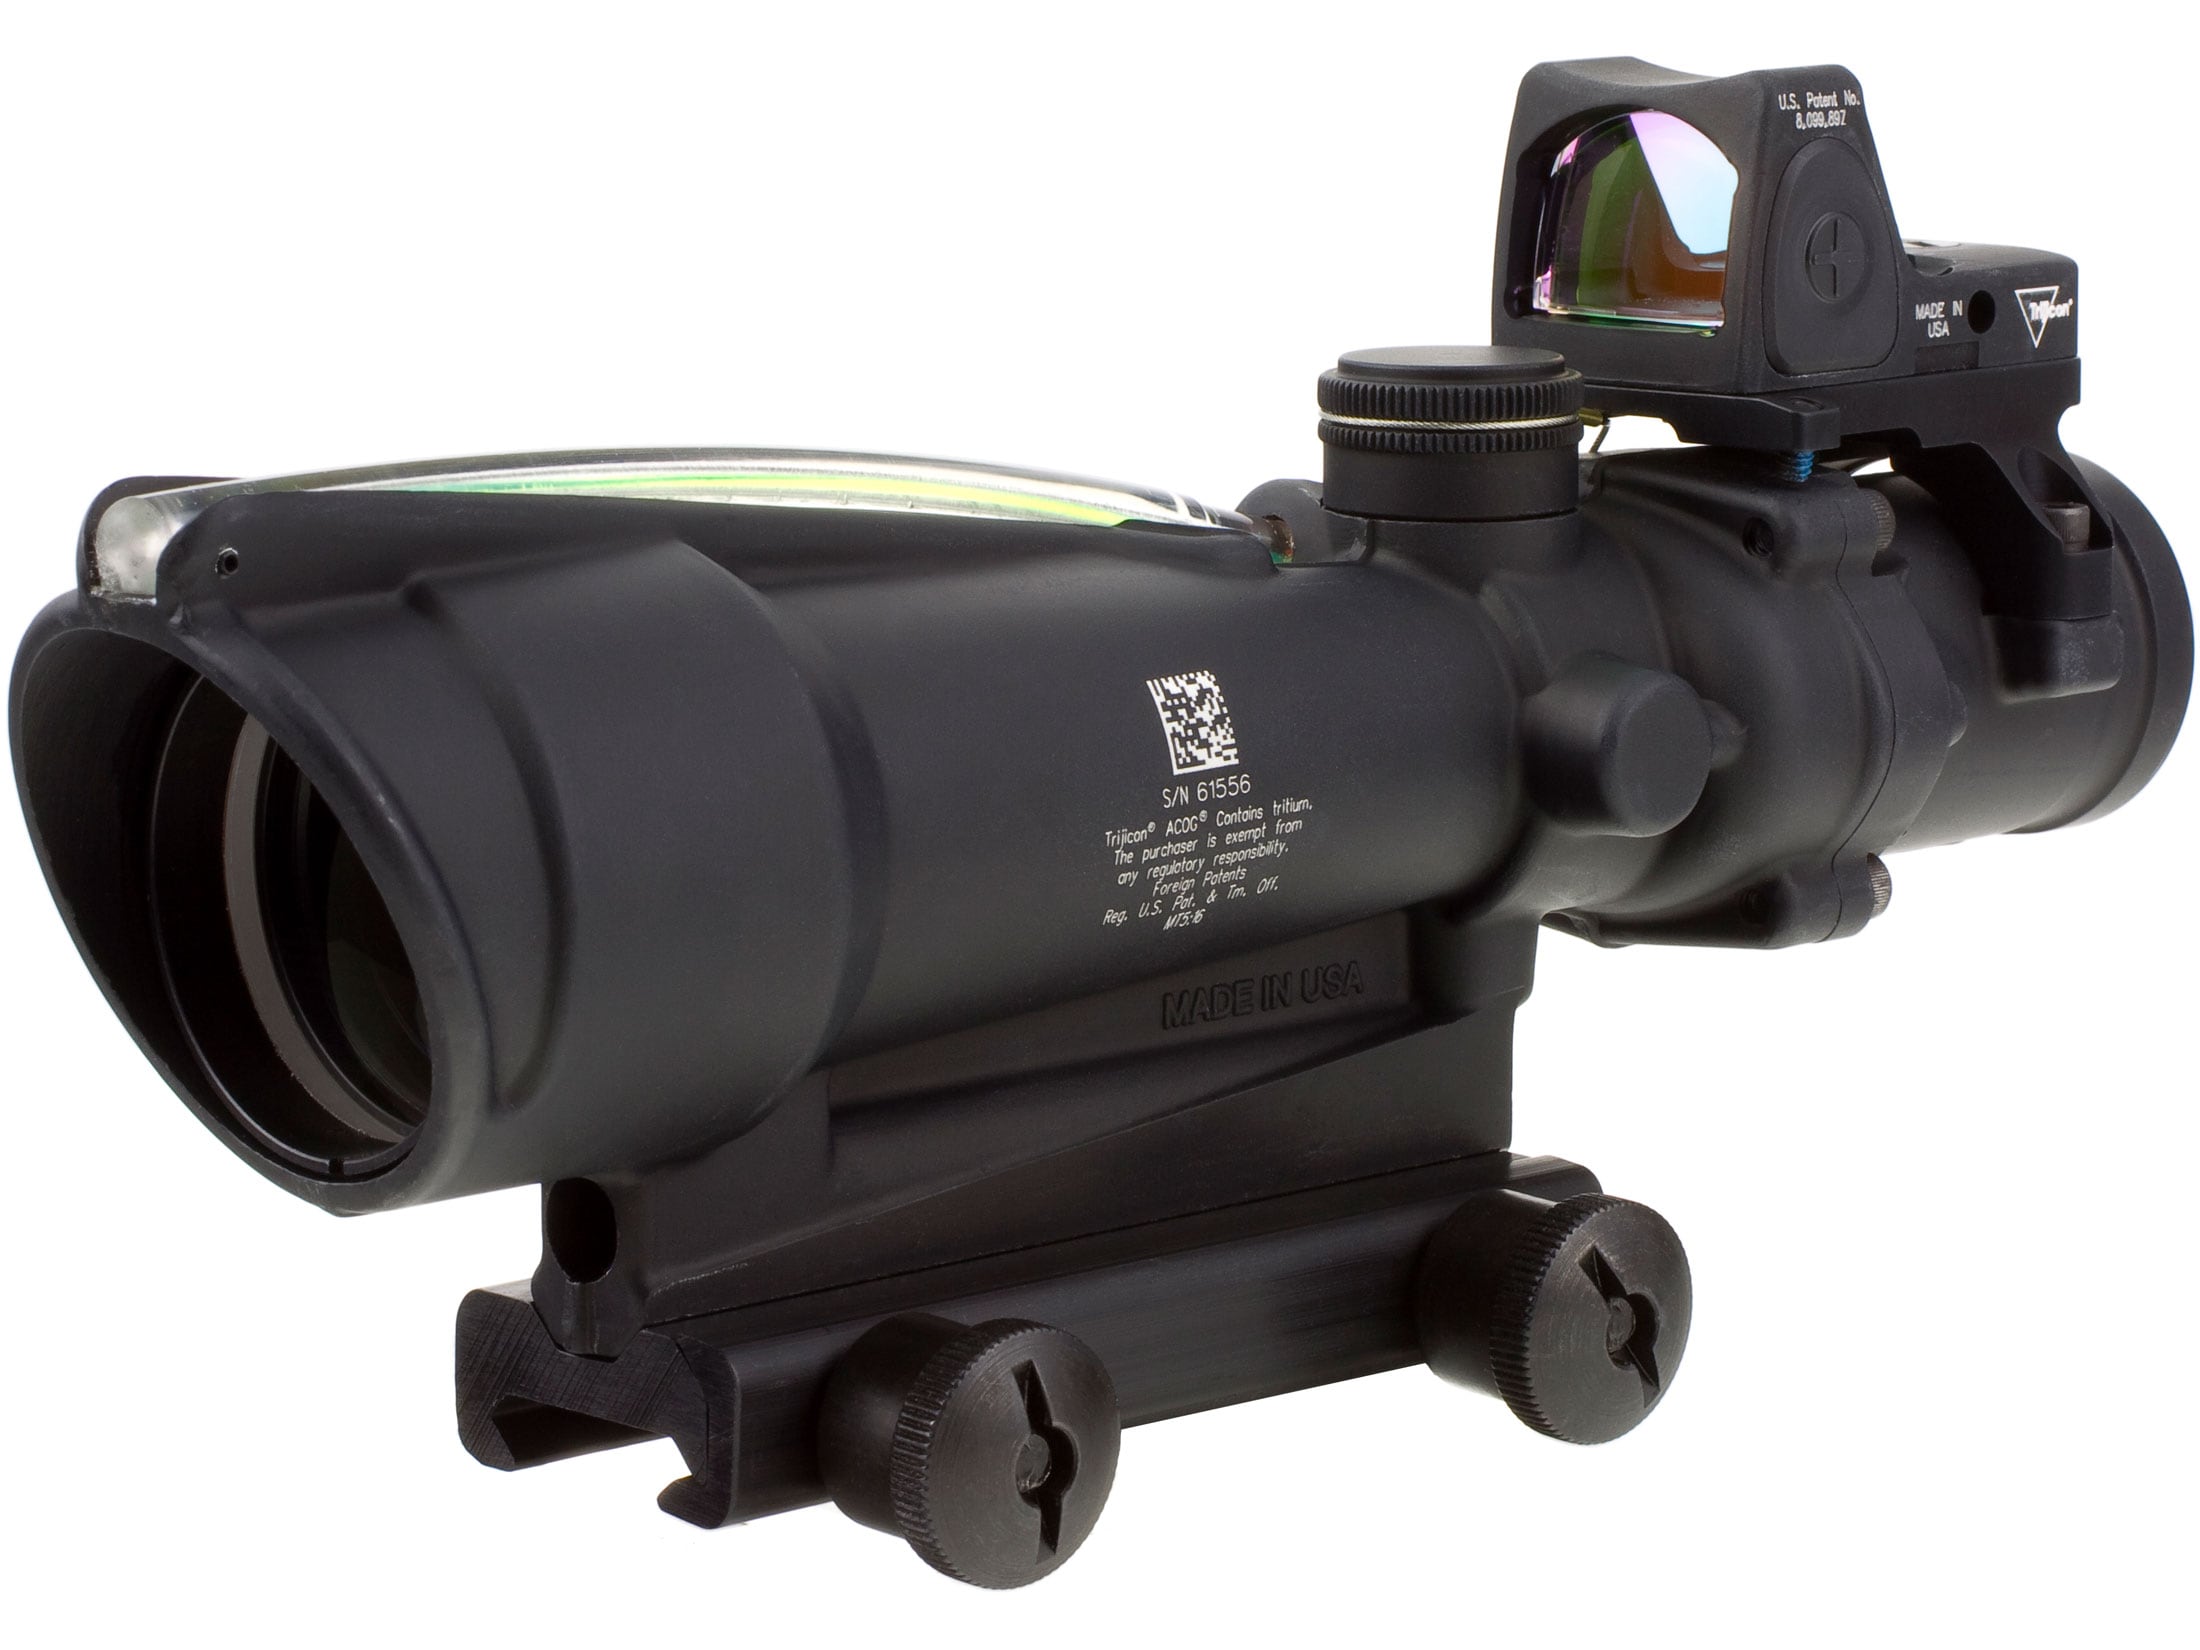 Trijicon ACOG Rifle Scope 3.5x 35mm Dual-Illuminated Green Chevron 223 Remington Reticle with 3.25 MOA RMR Type 2 Adjustable LED Red Dot Sight and Colt Knob Thumbscrew Mount Matte For Sale